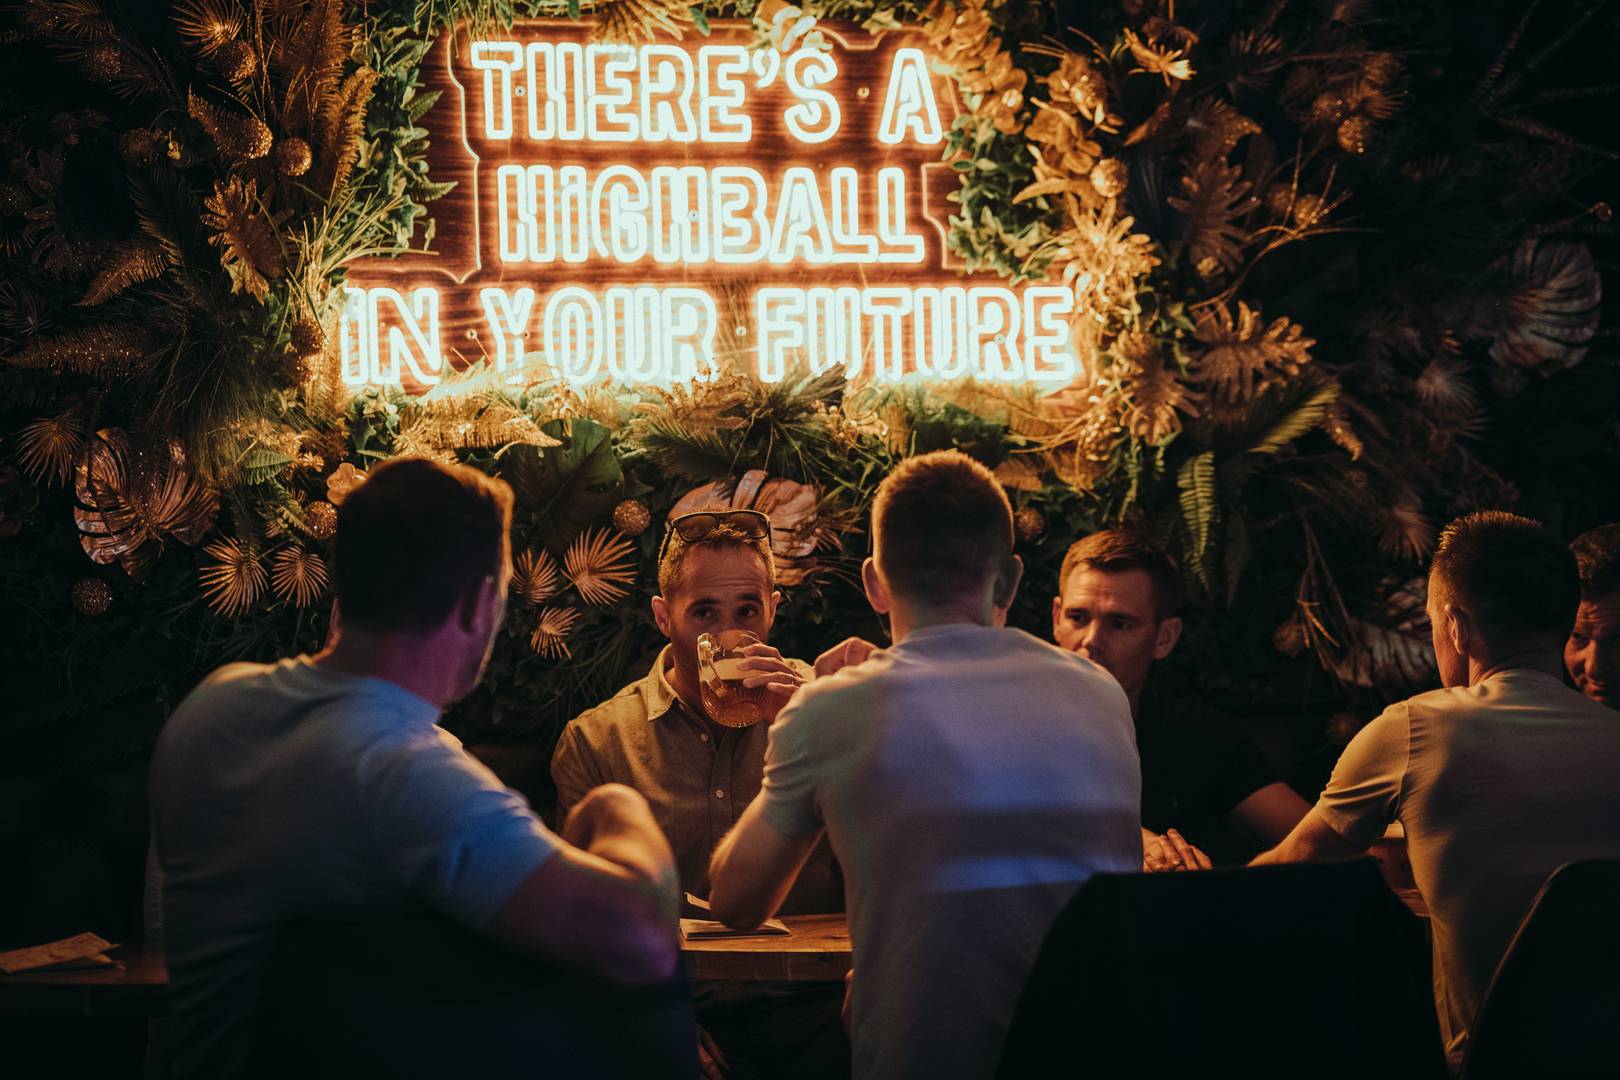 There is a highball in your future sign with group enjoying drinks